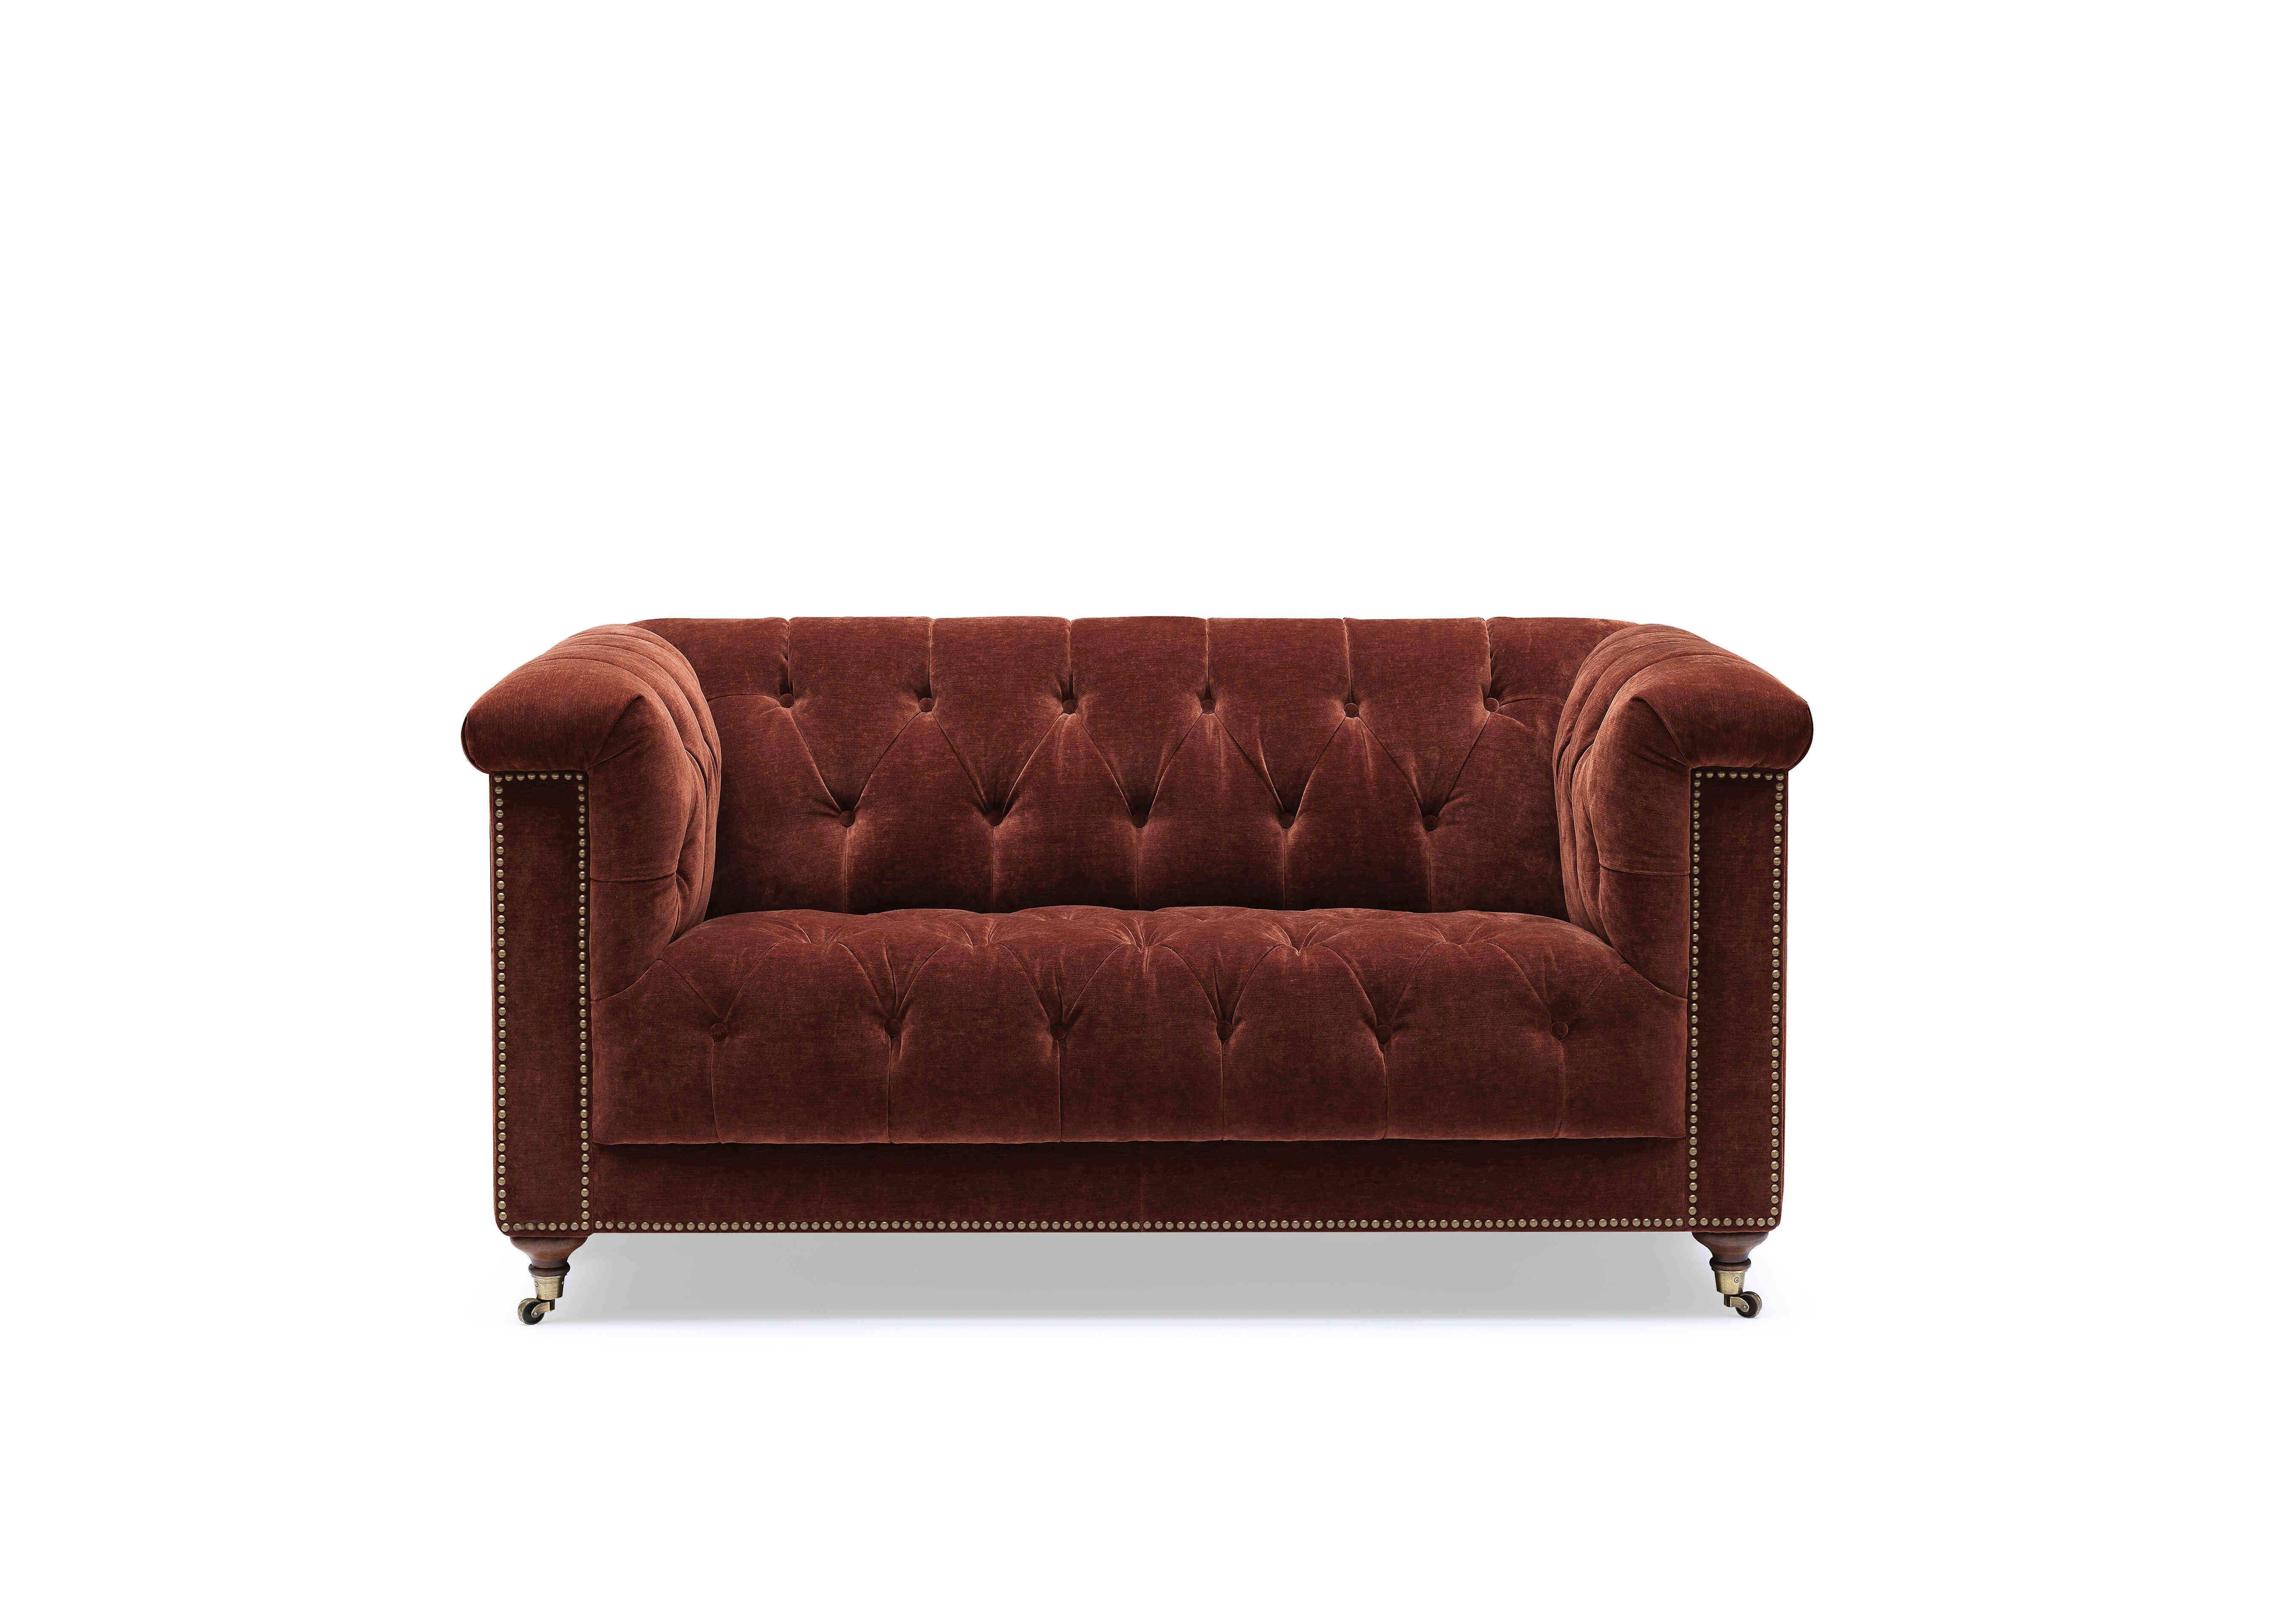 Wallace 2 Seater Fabric Chesterfield Sofa in X3y1-W019 Tawny on Furniture Village